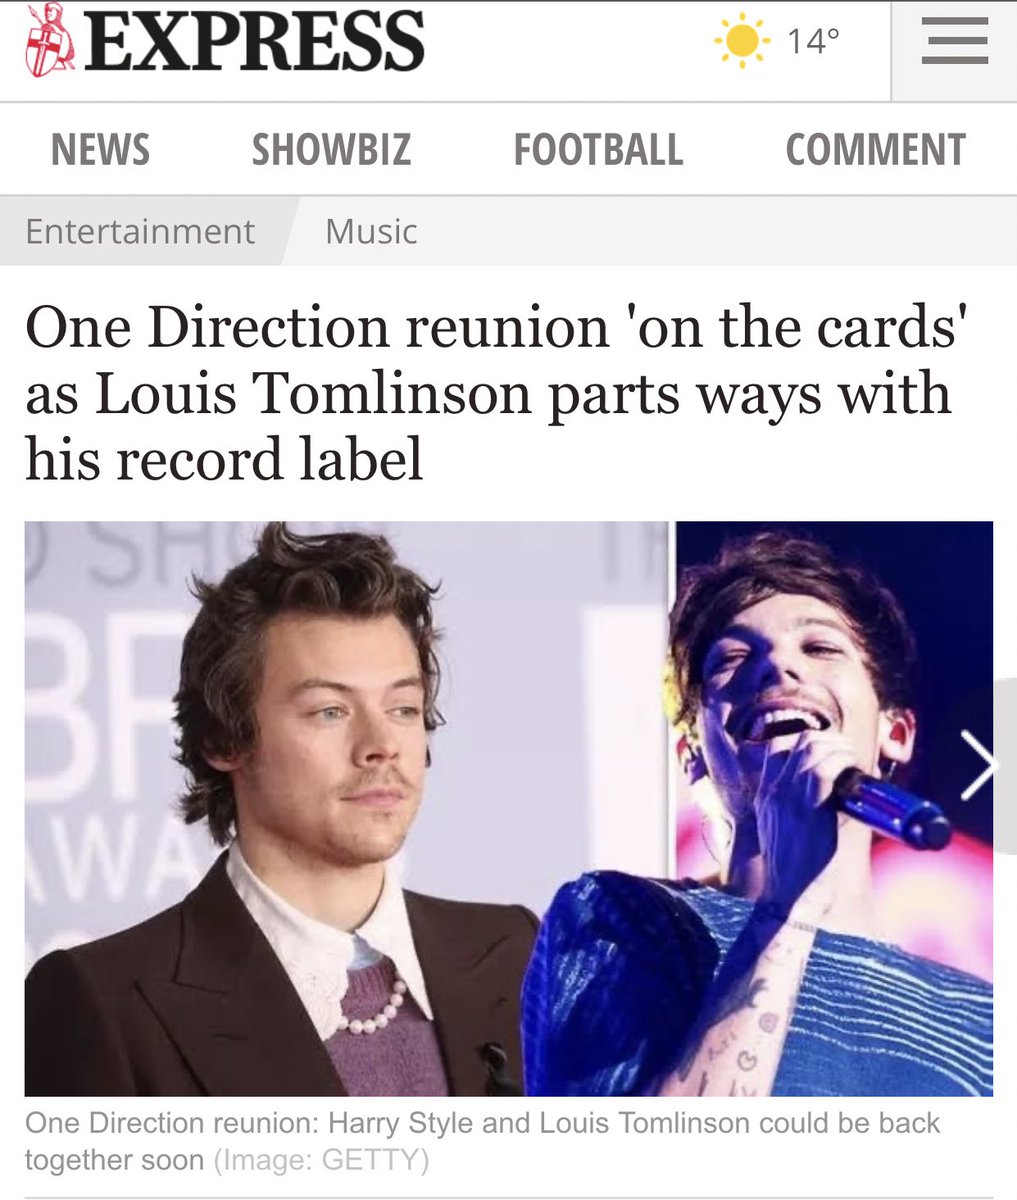  https://www.express.co.uk/entertainment/music/1309874/one-direction-reunion-louis-tomlinson-1d-10th-anniversary-date-harry-styles-newsArticle from a month ago